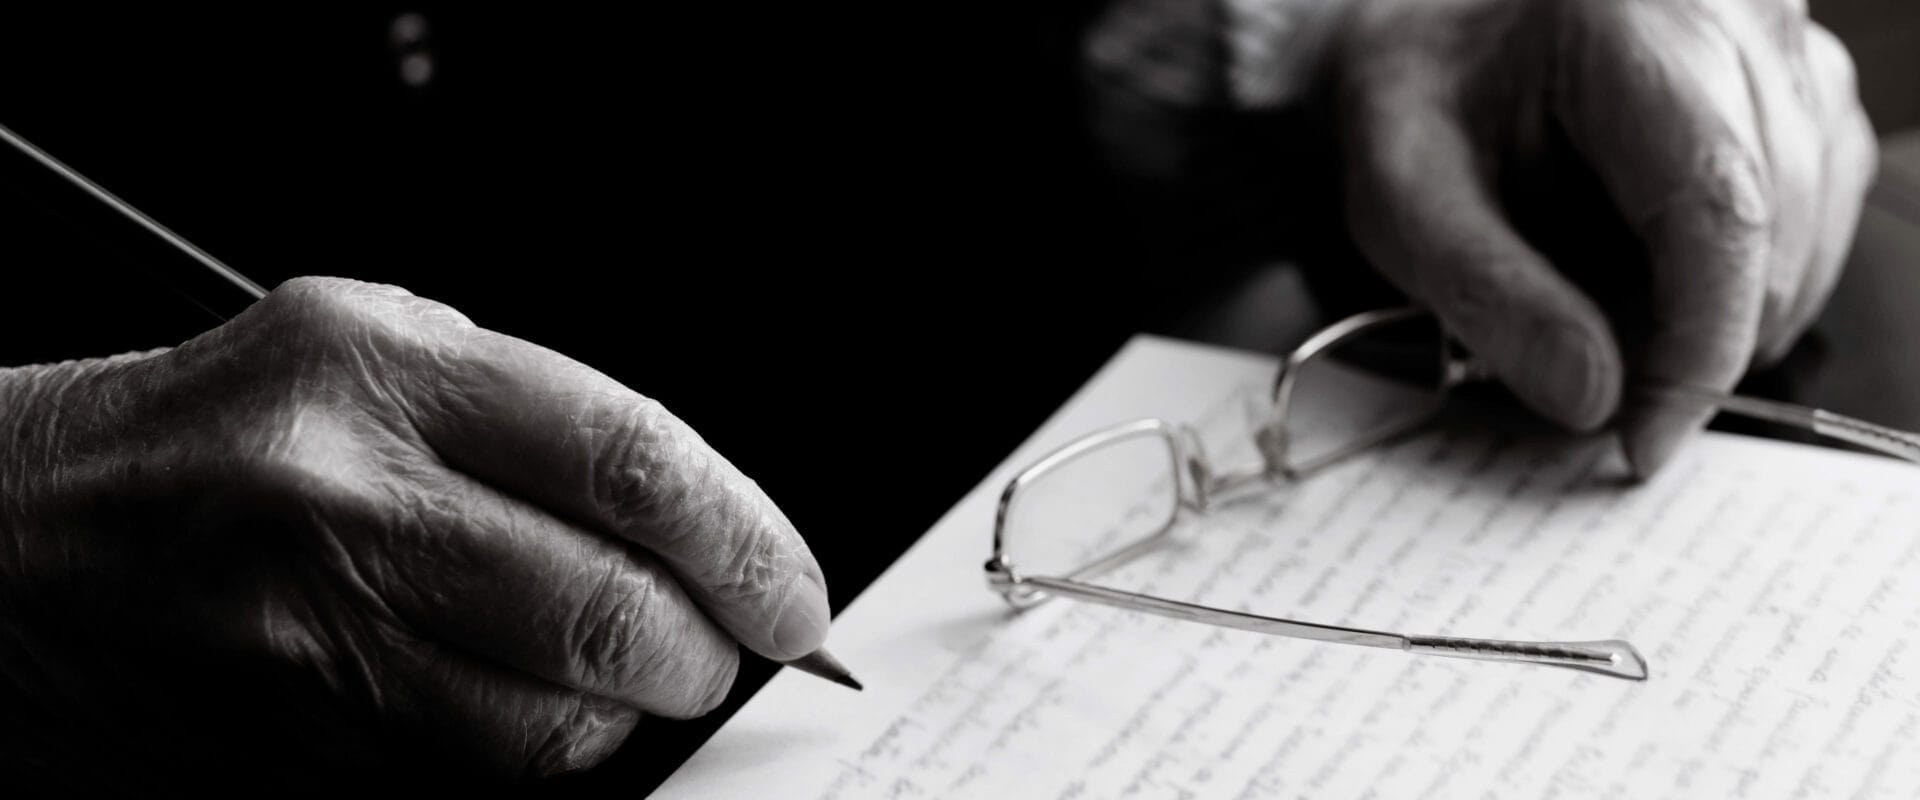 Male hands signing a contract with glasses one hand and a pen in the other.